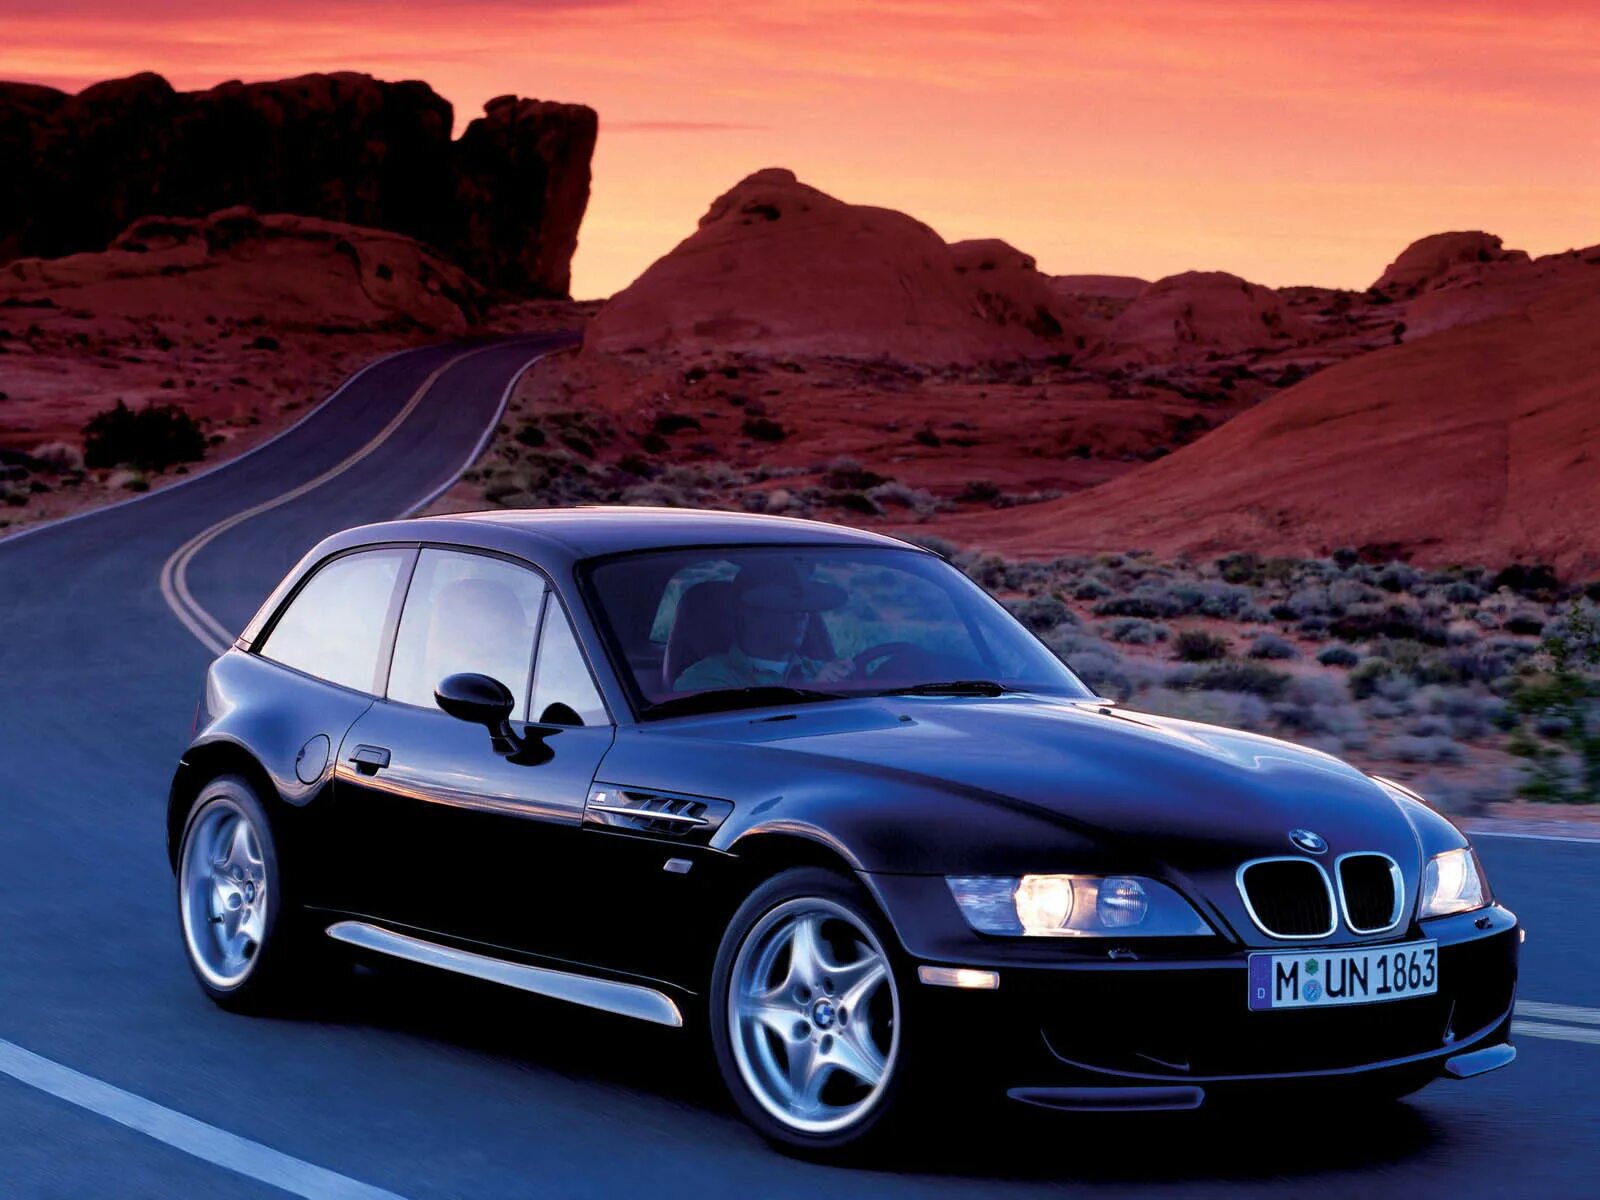 Z3m. BMW z3 Coupe. БМВ z3 m Coupe. BMW z3 Coupe 2002. BMW z3m Coupe 1999.